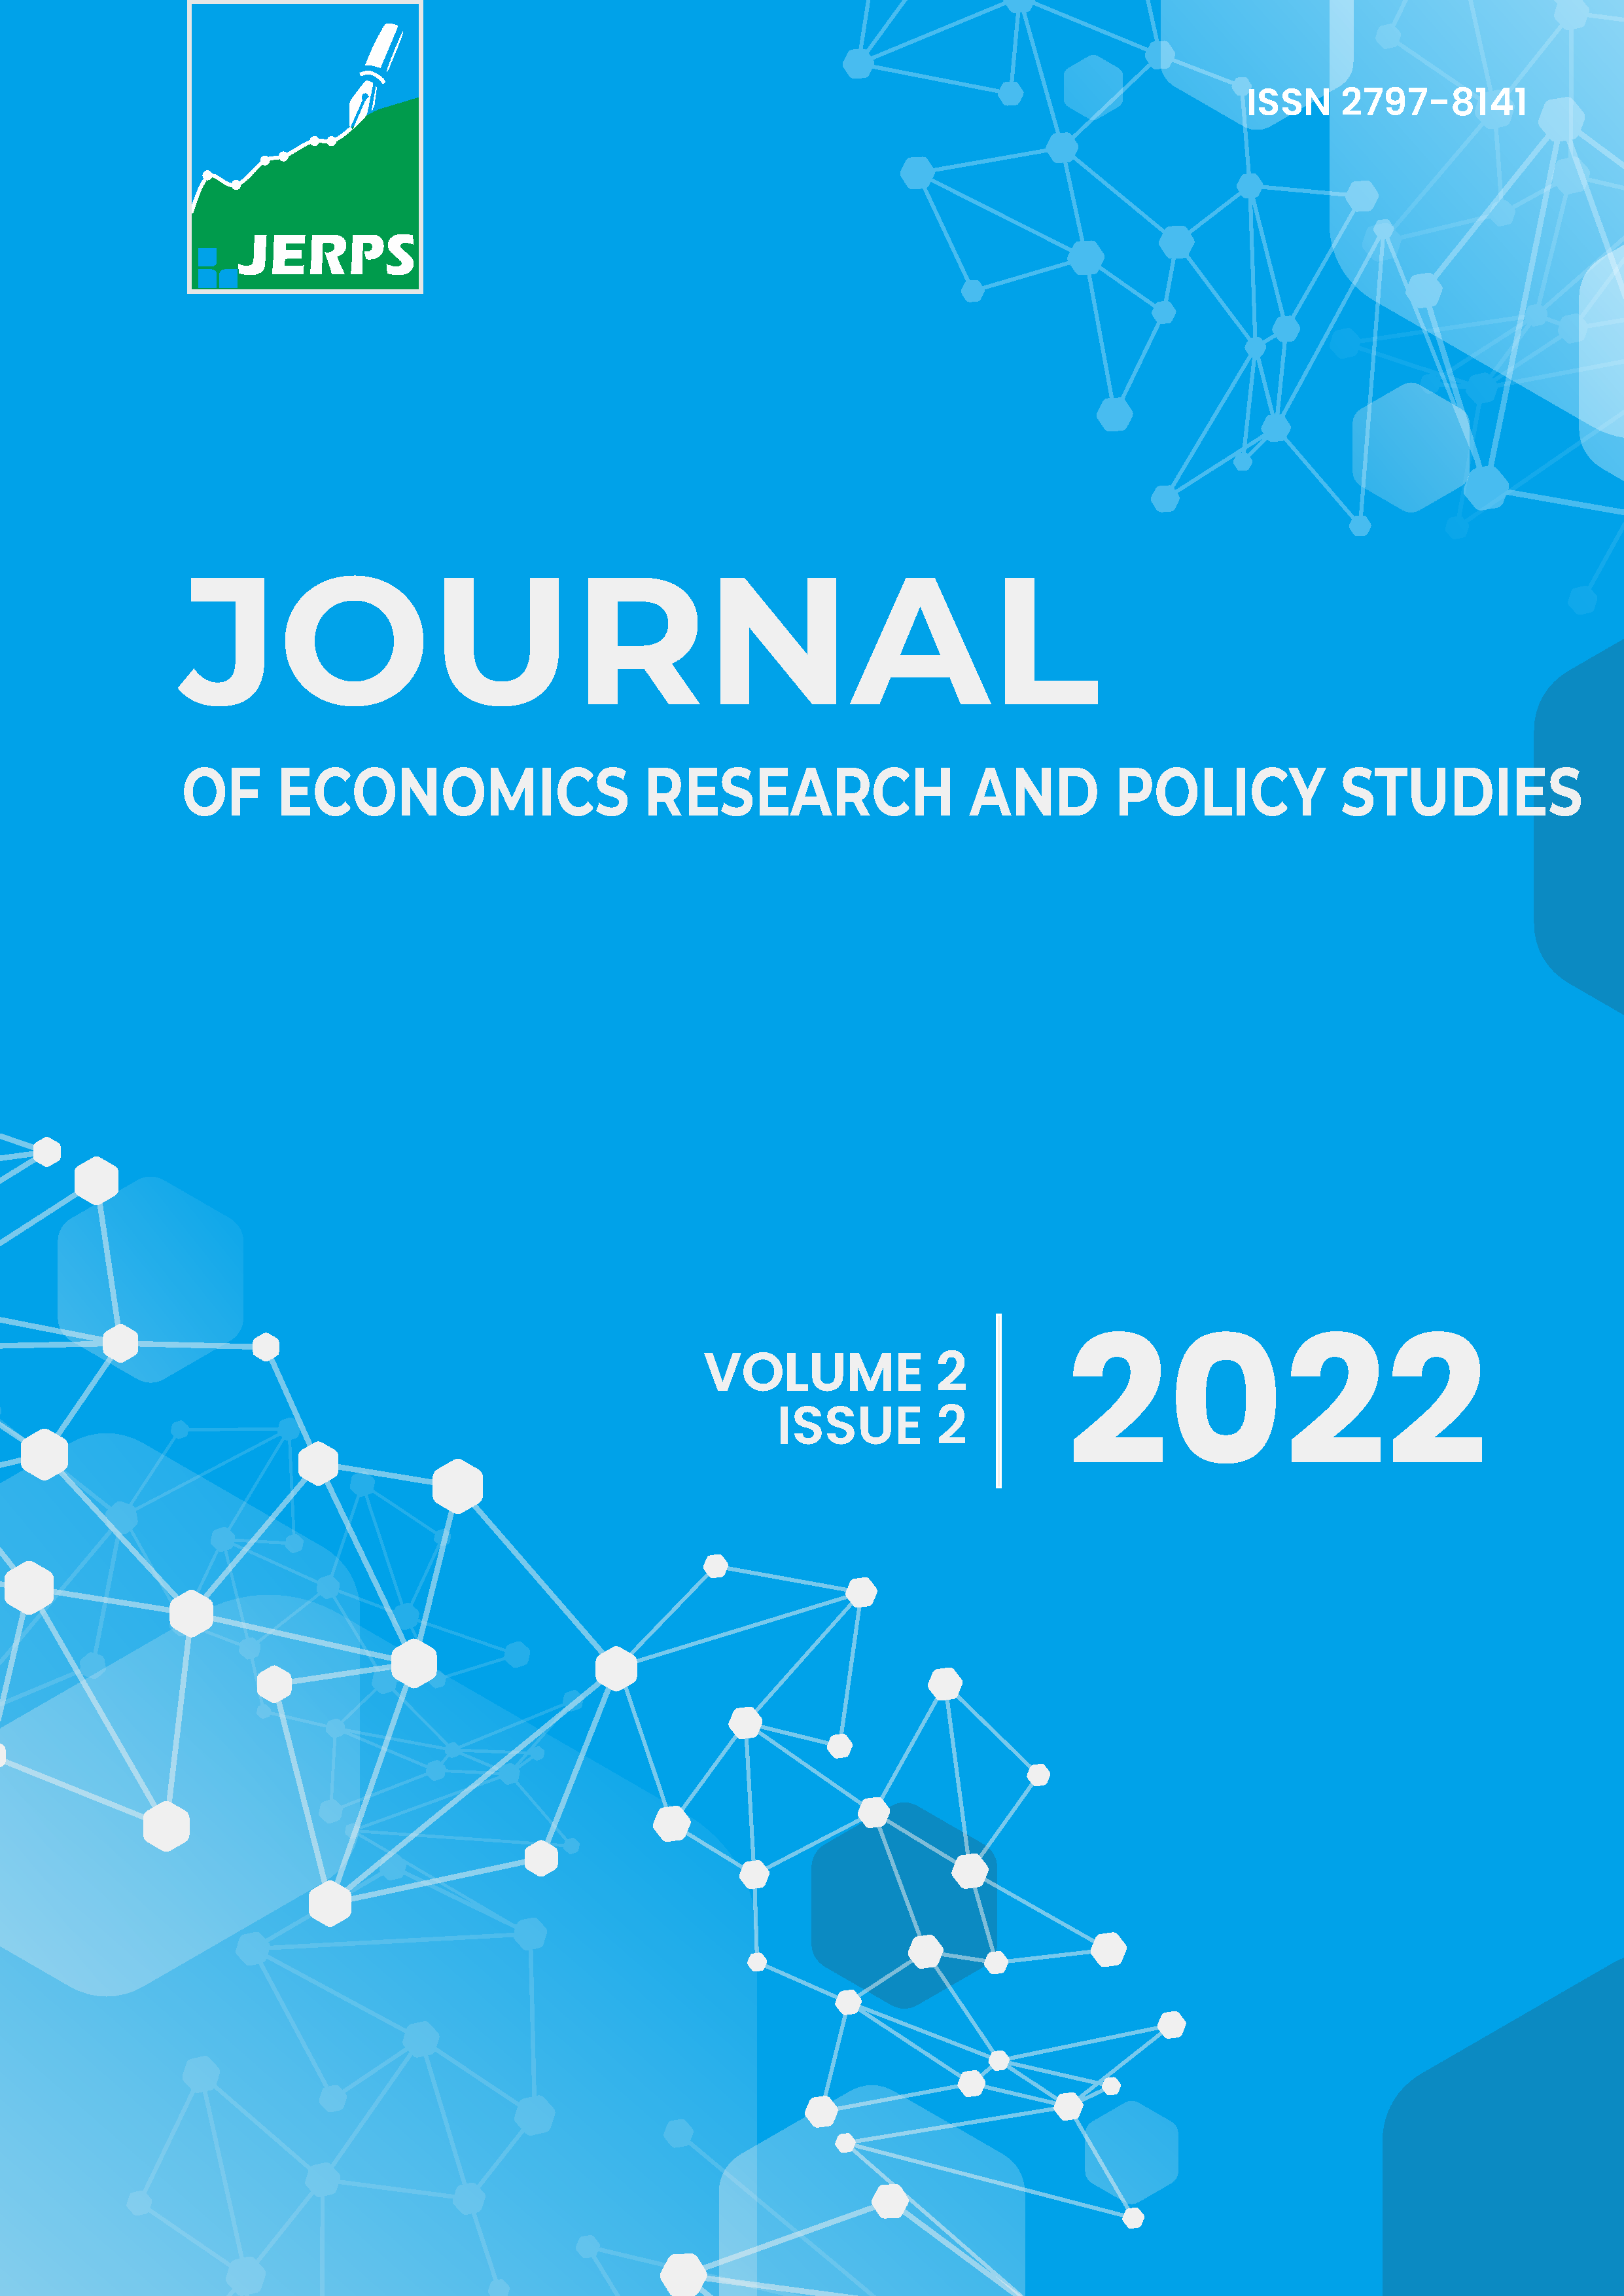 					View Vol. 2 No. 2 (2022): Journal of Economics Research and Policy Studies
				